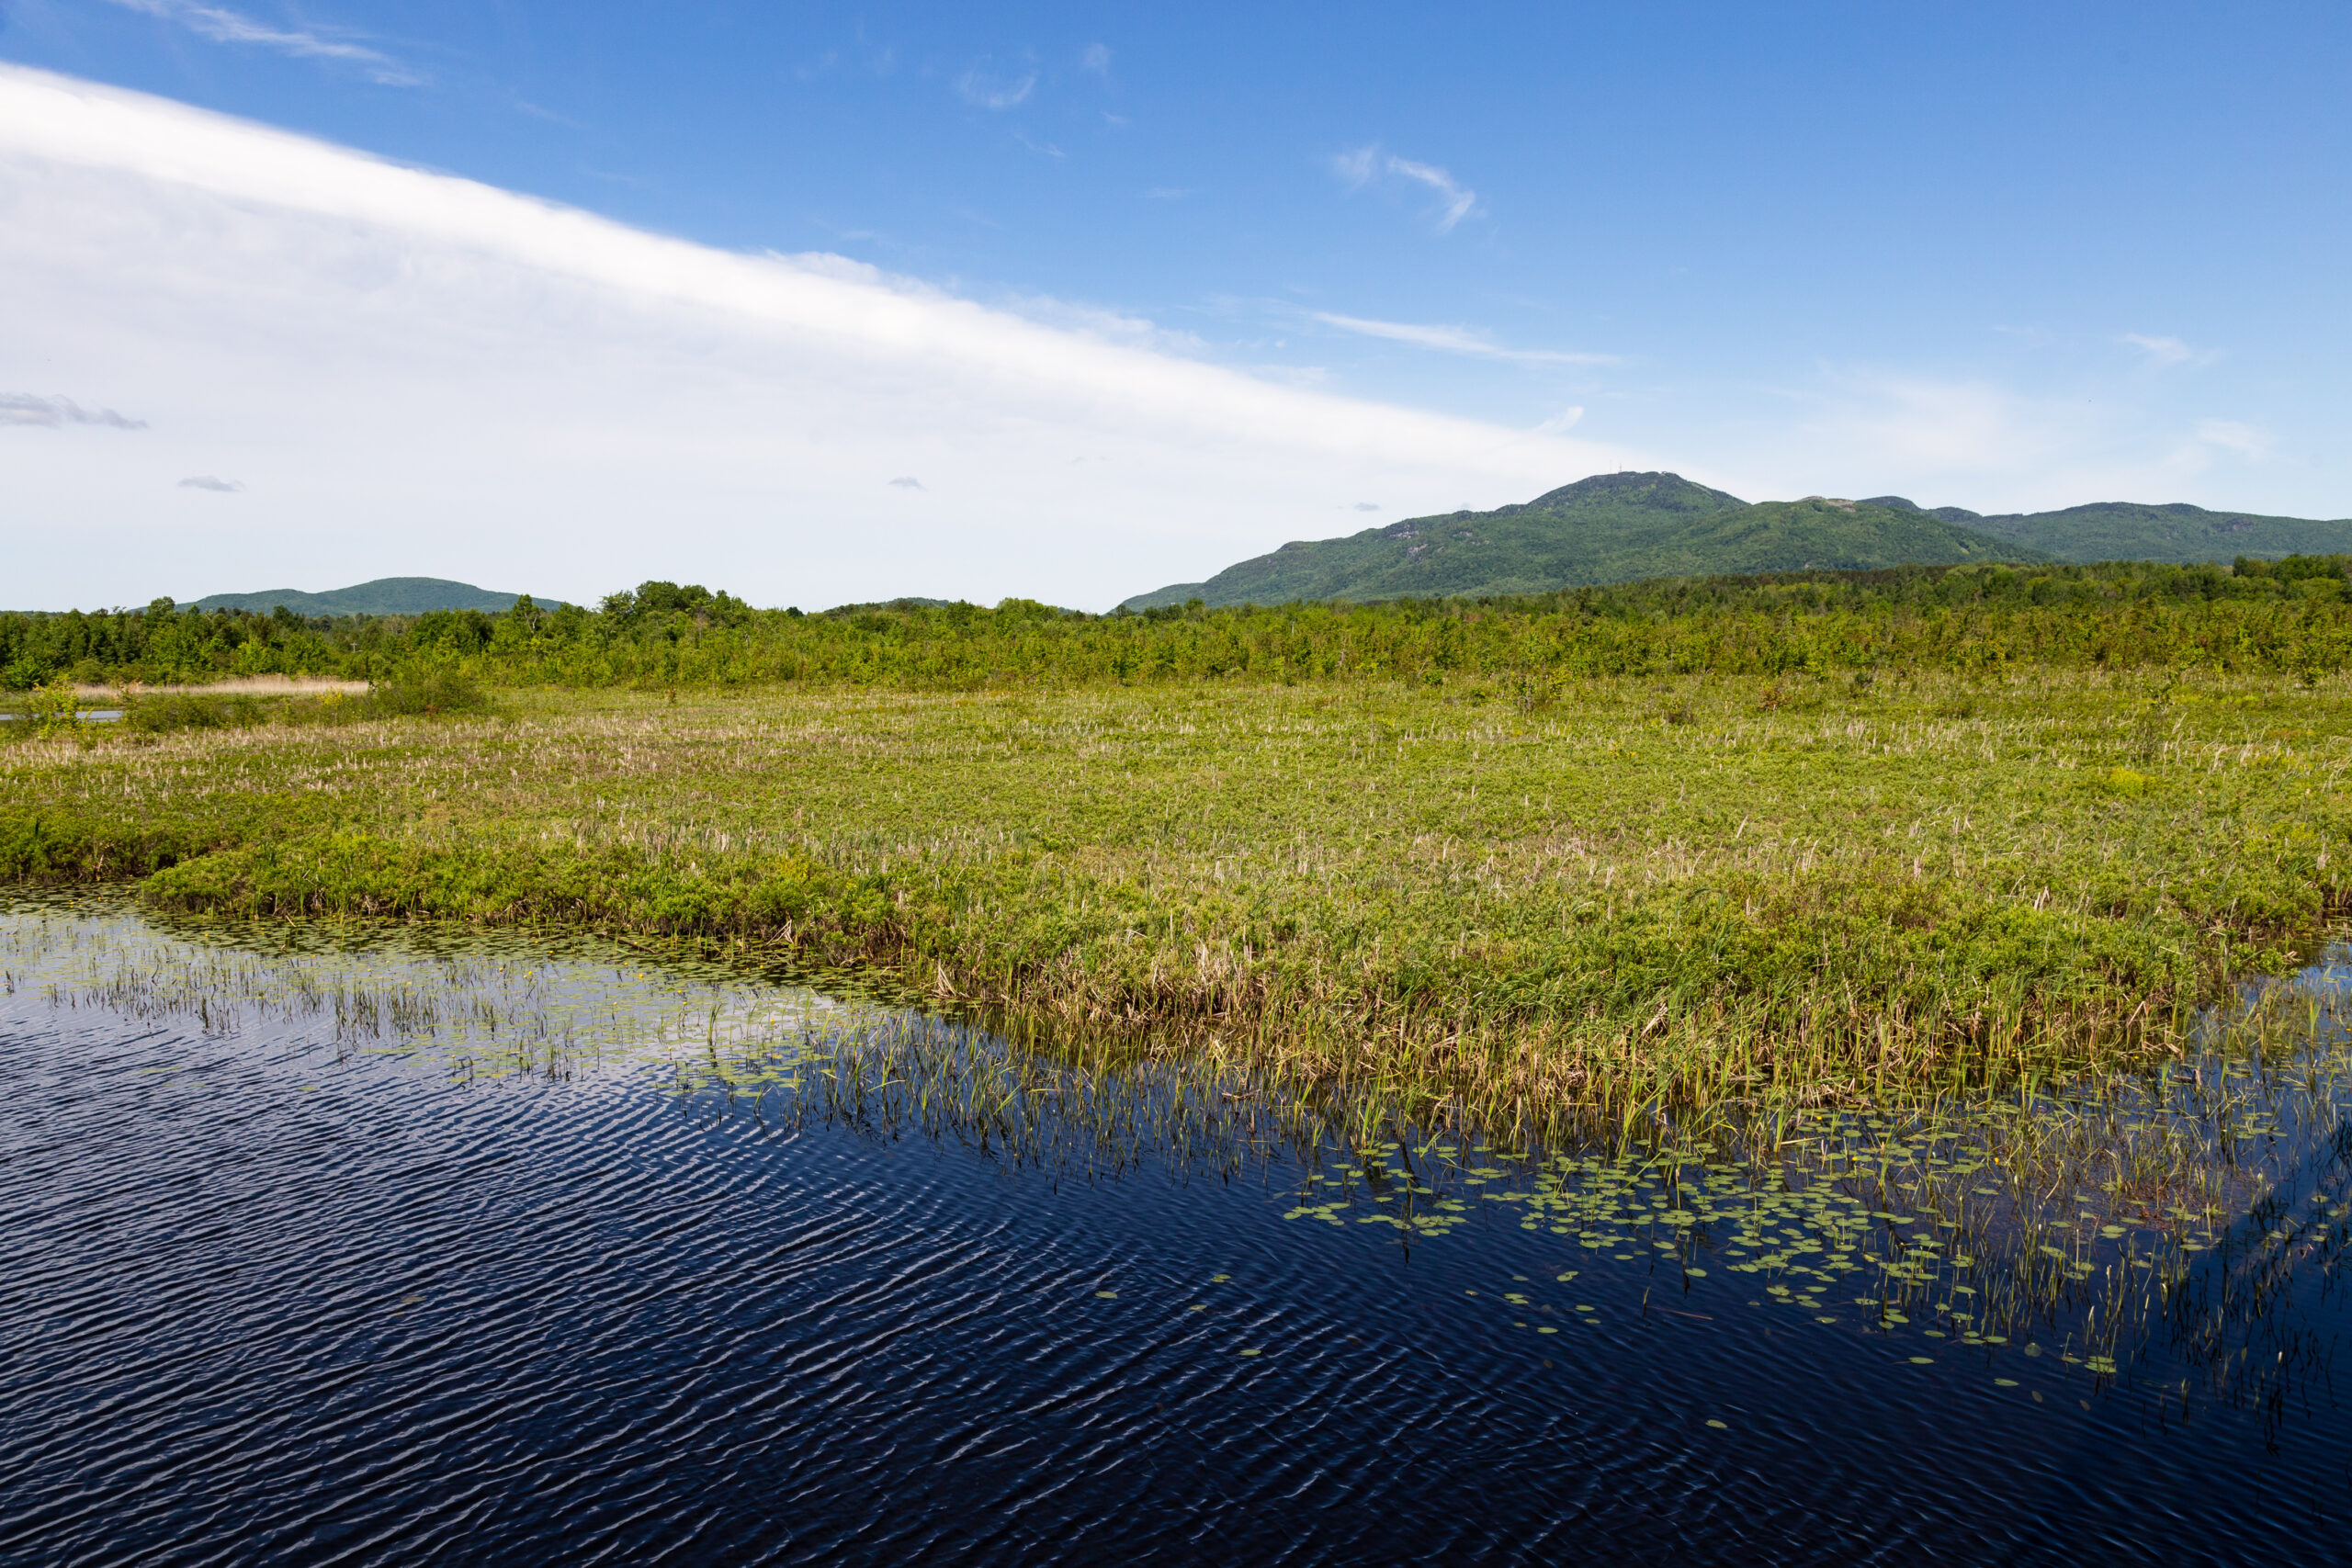 The Cherry River Marsh seen during a spring day, with Mont Orford in the background, Magog, Quebec, Canada